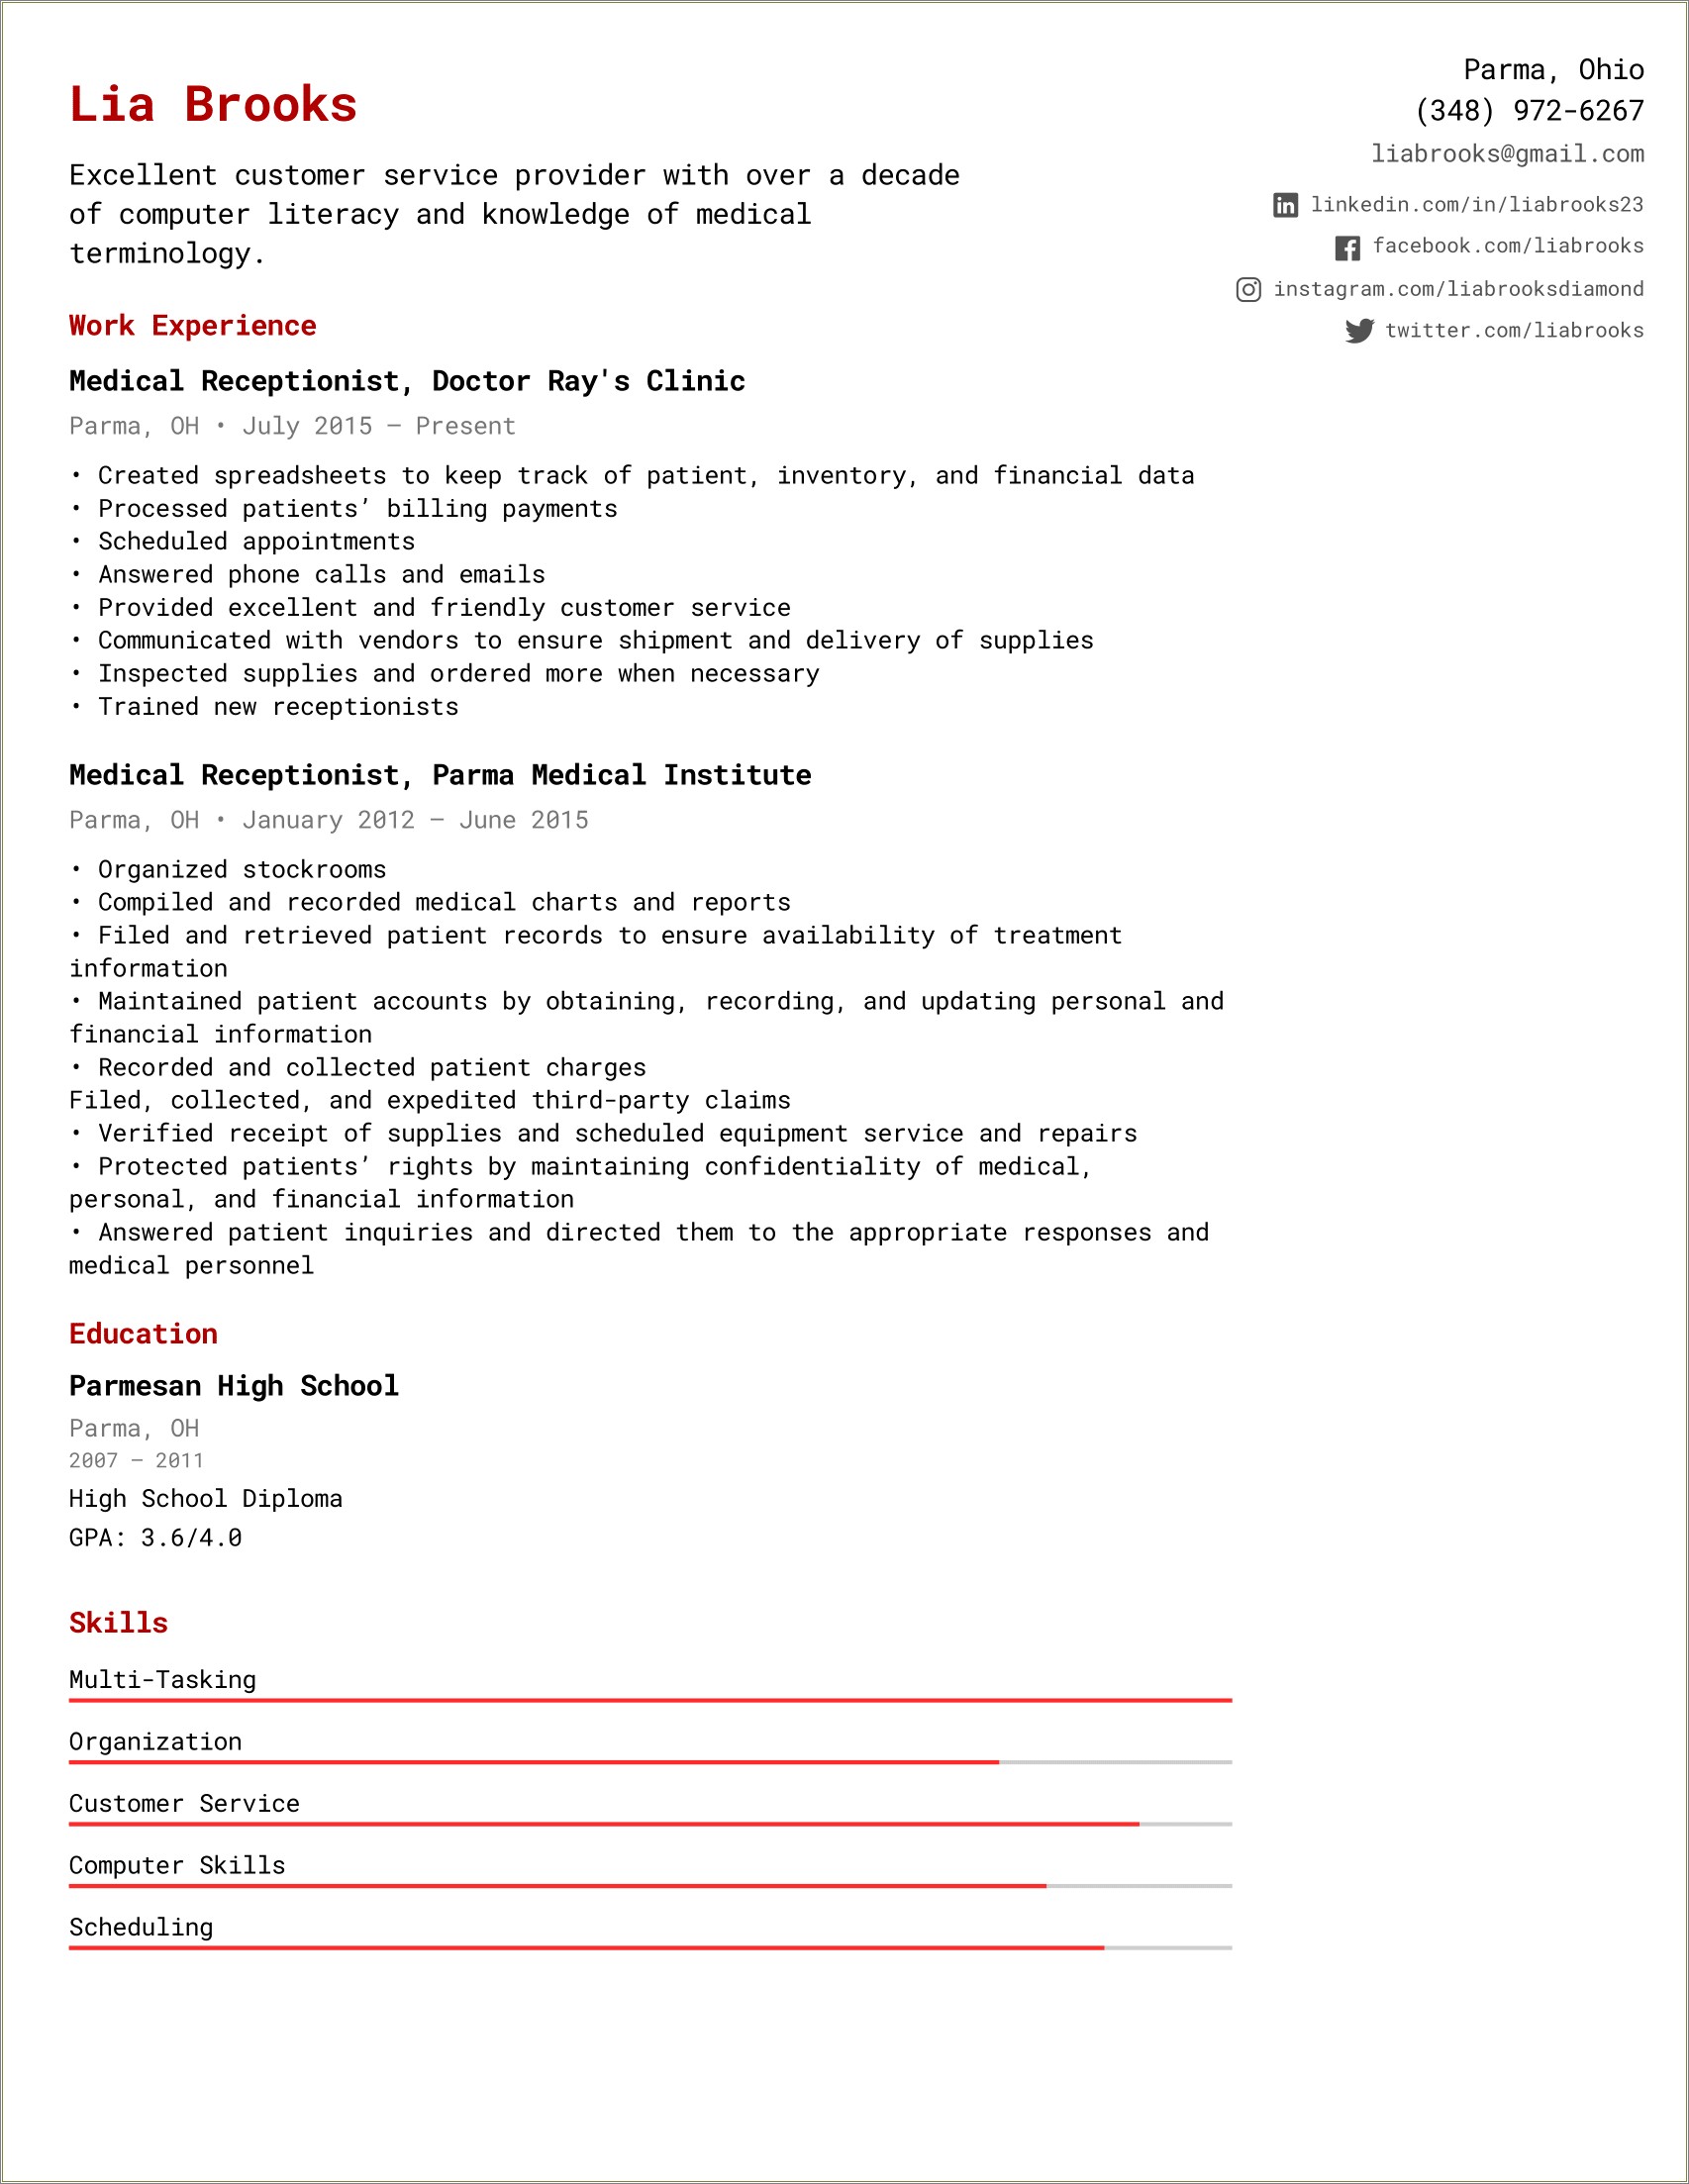 Examples Of Resume Profile For Gym Receptionist